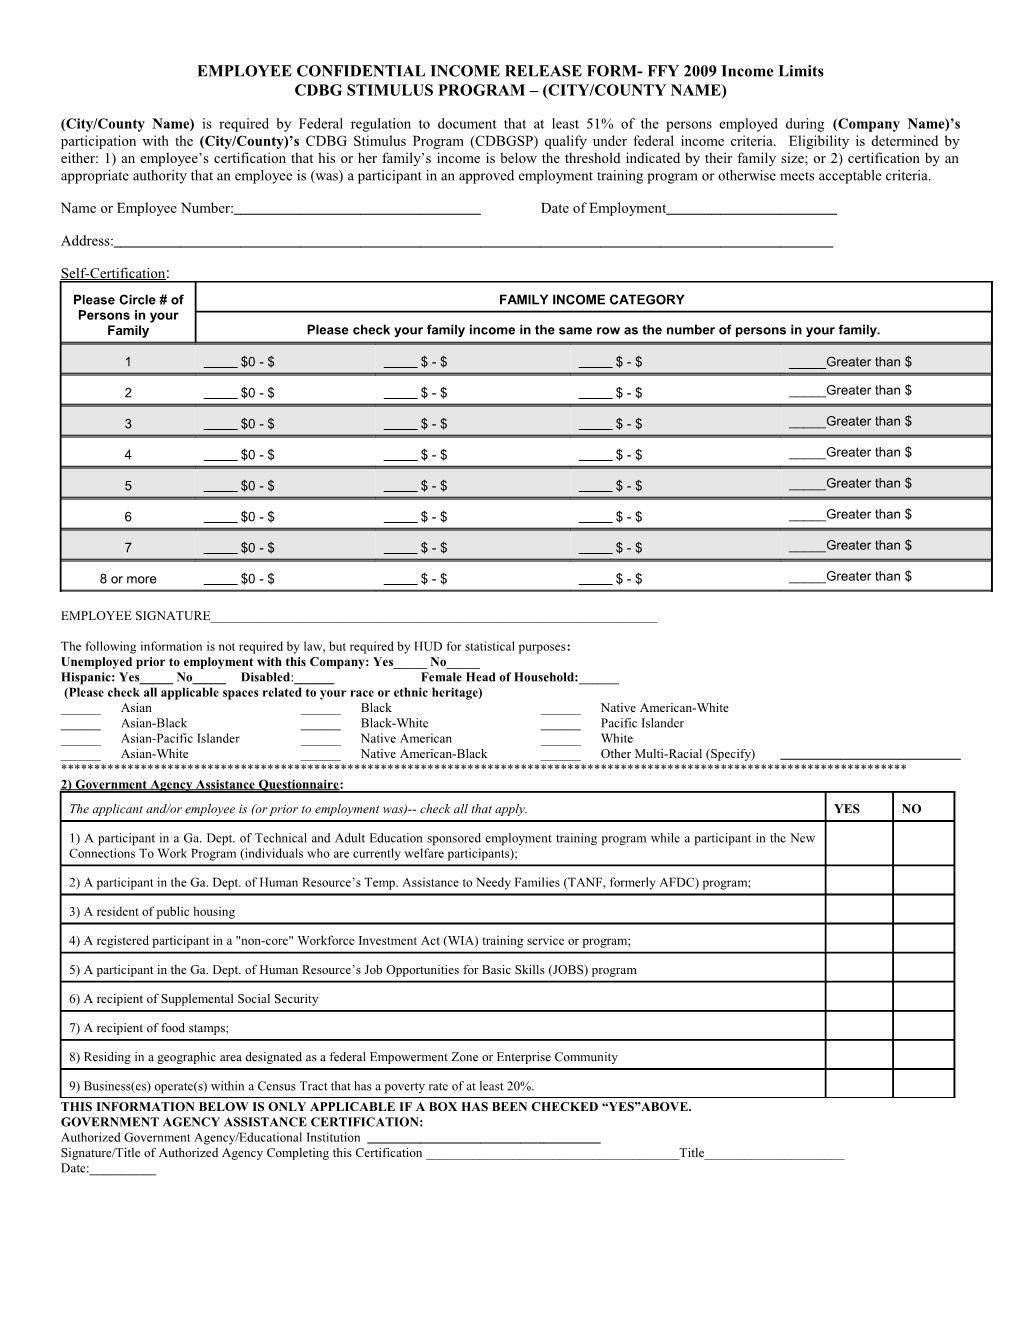 EMPLOYEE CONFIDENTIAL INCOME RELEASE FORM- FFY 2009 Income Limits